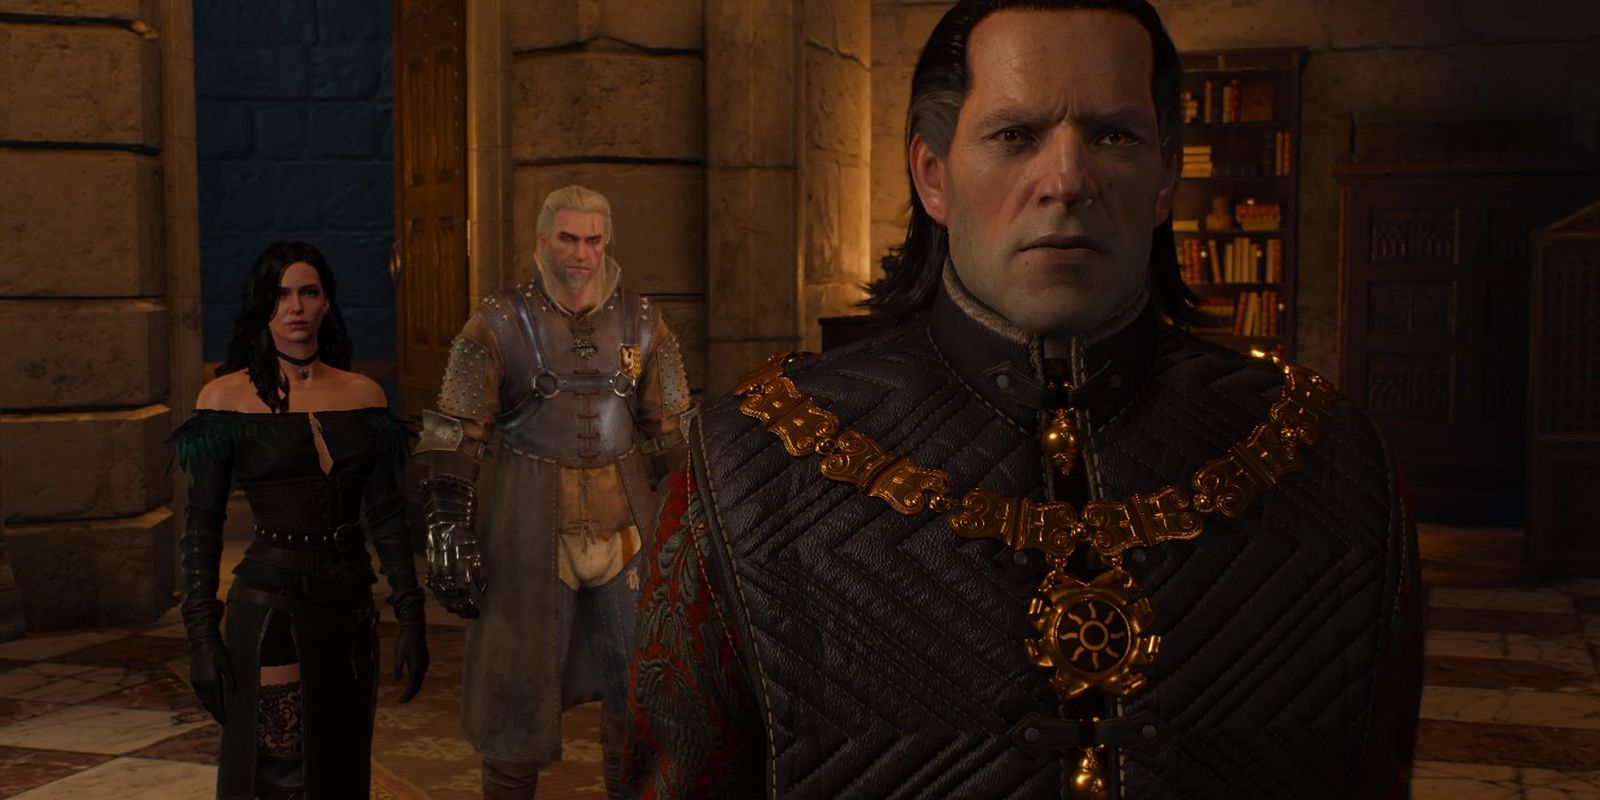 Geralt with other characters